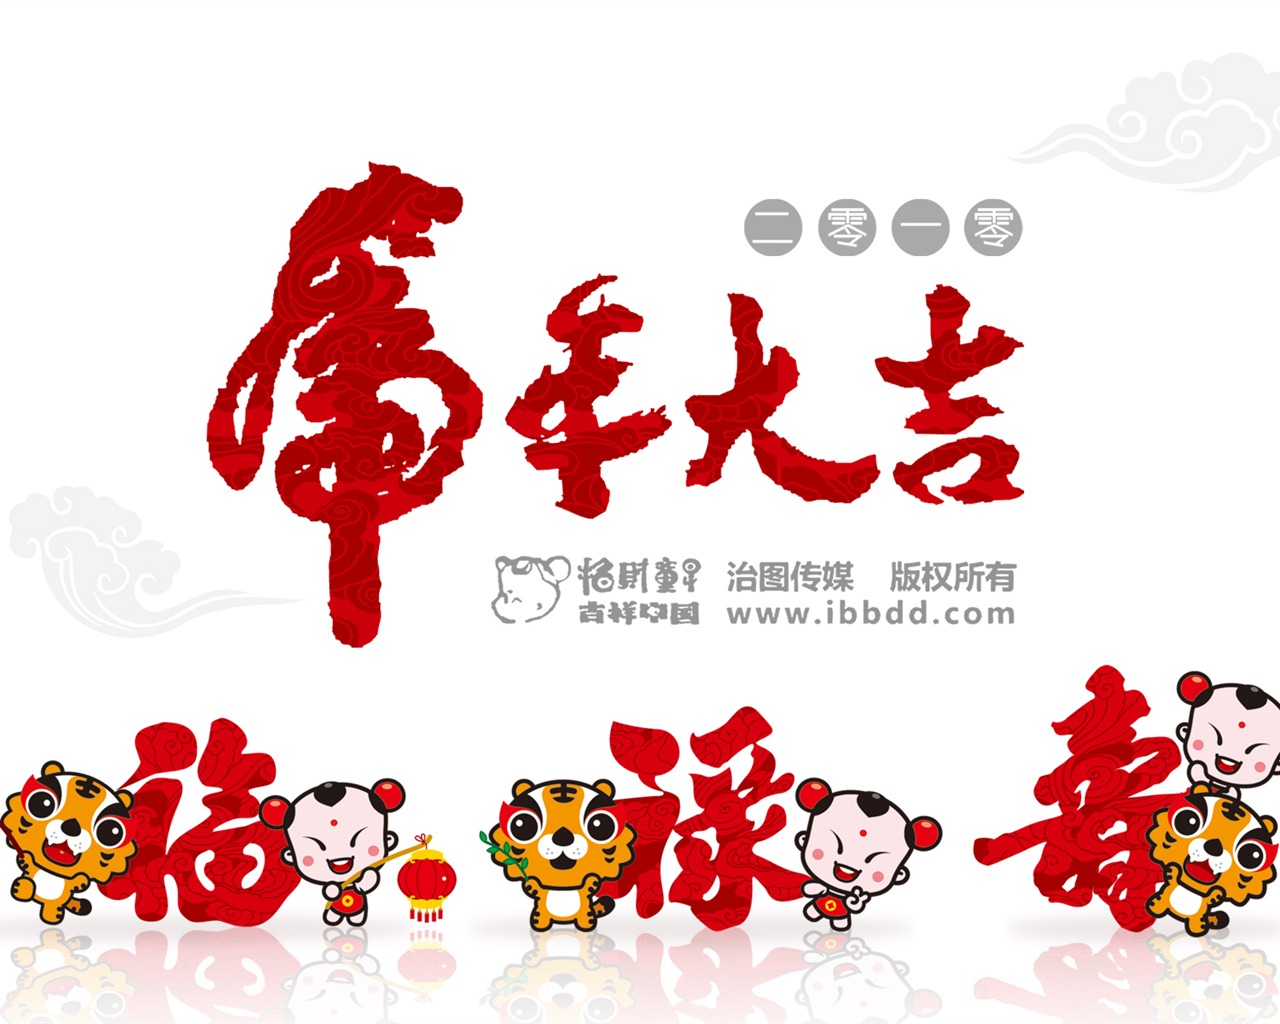 Lucky Boy Year of the Tiger Wallpaper #2 - 1280x1024